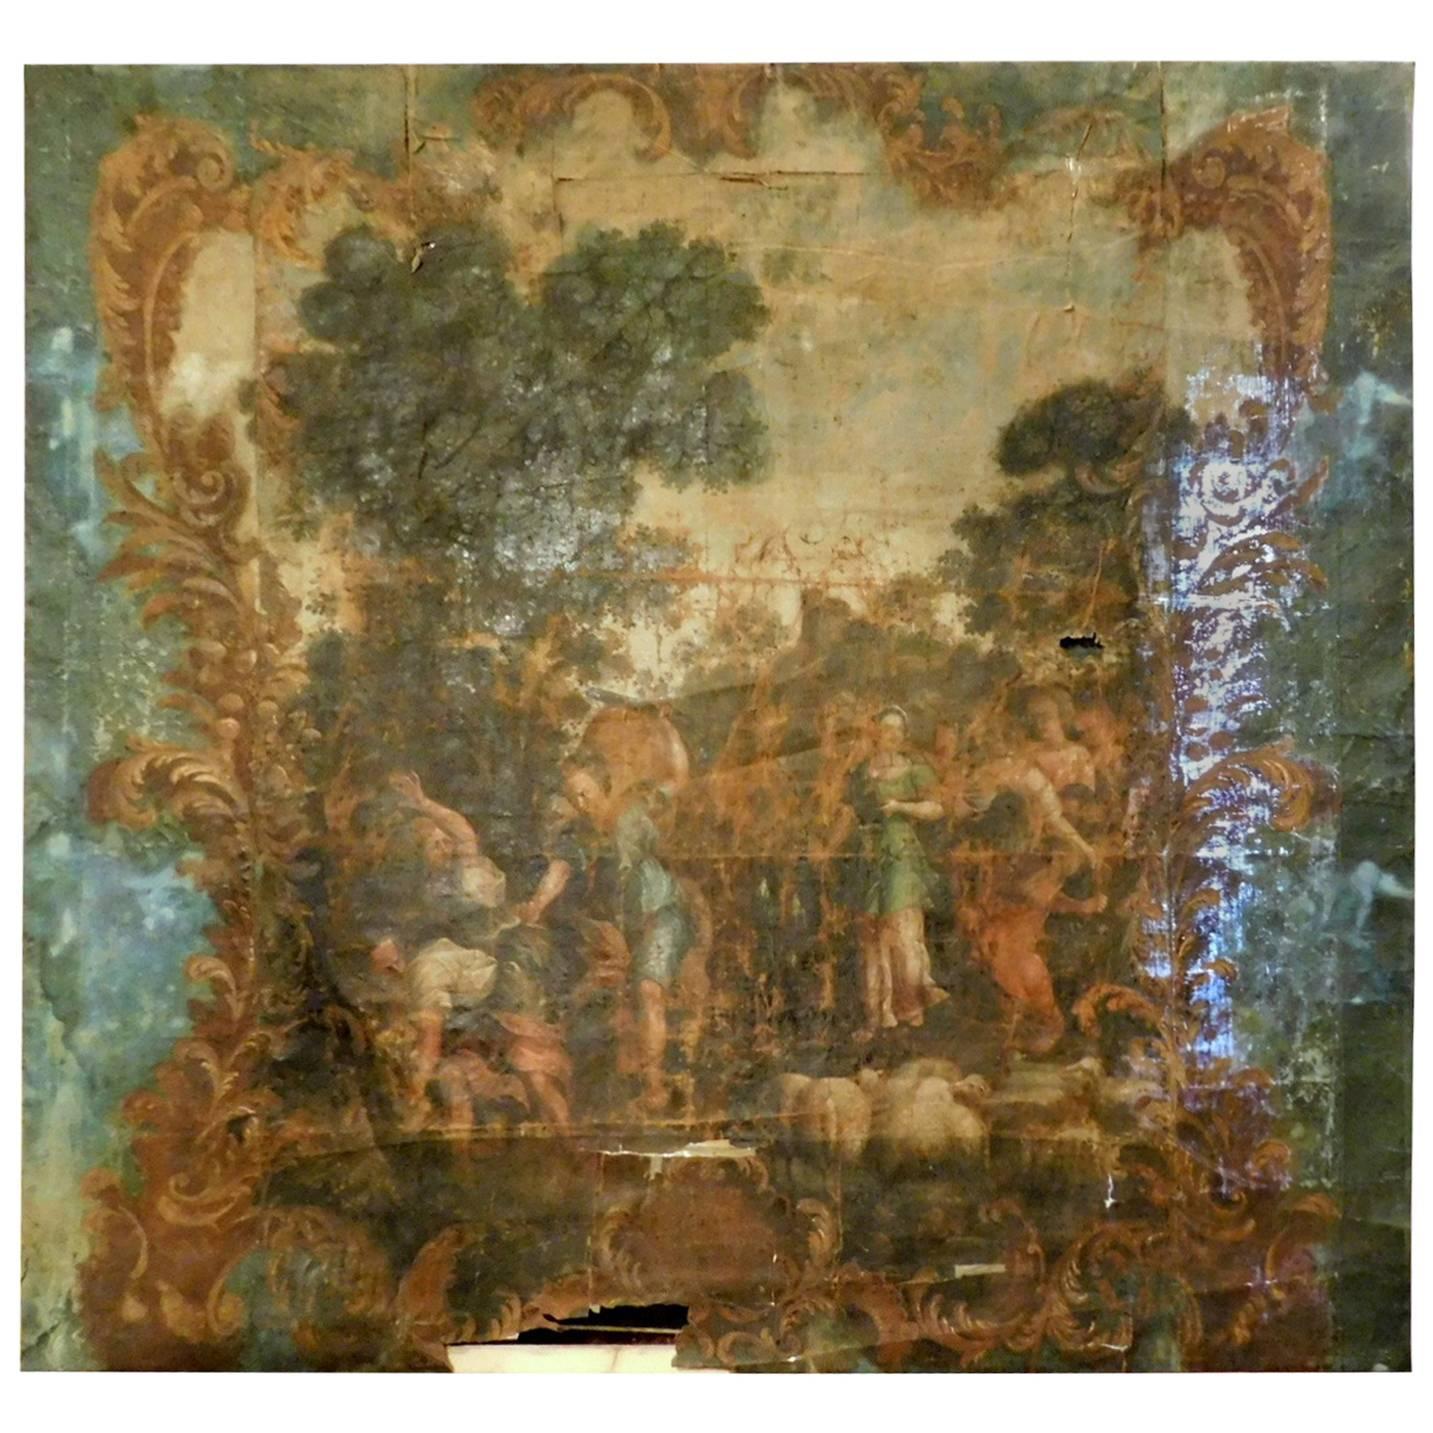 Antique Oil on Canvas with Biblical Scene